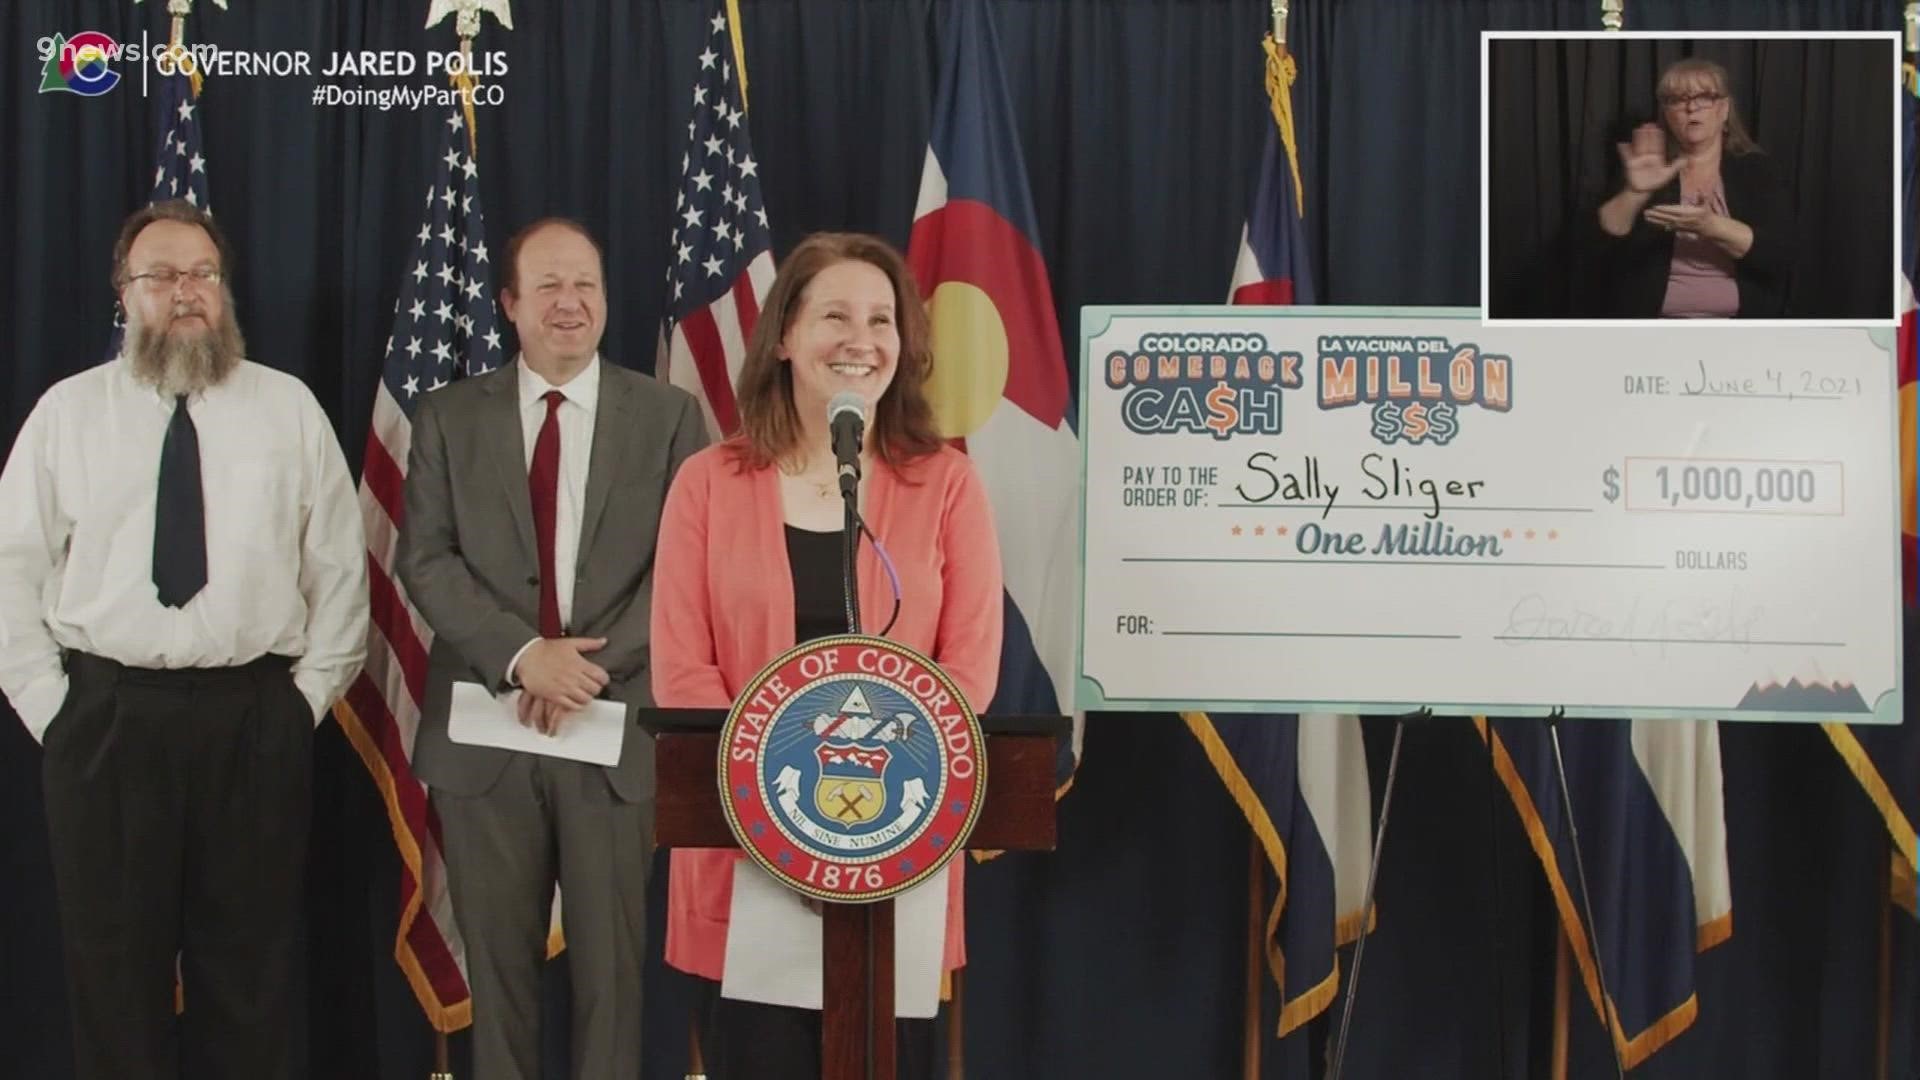 Gov. Jared Polis announced Sally Sliger as the first winner of Colorado's Comeback Cash COVID-19 vaccine drawing.